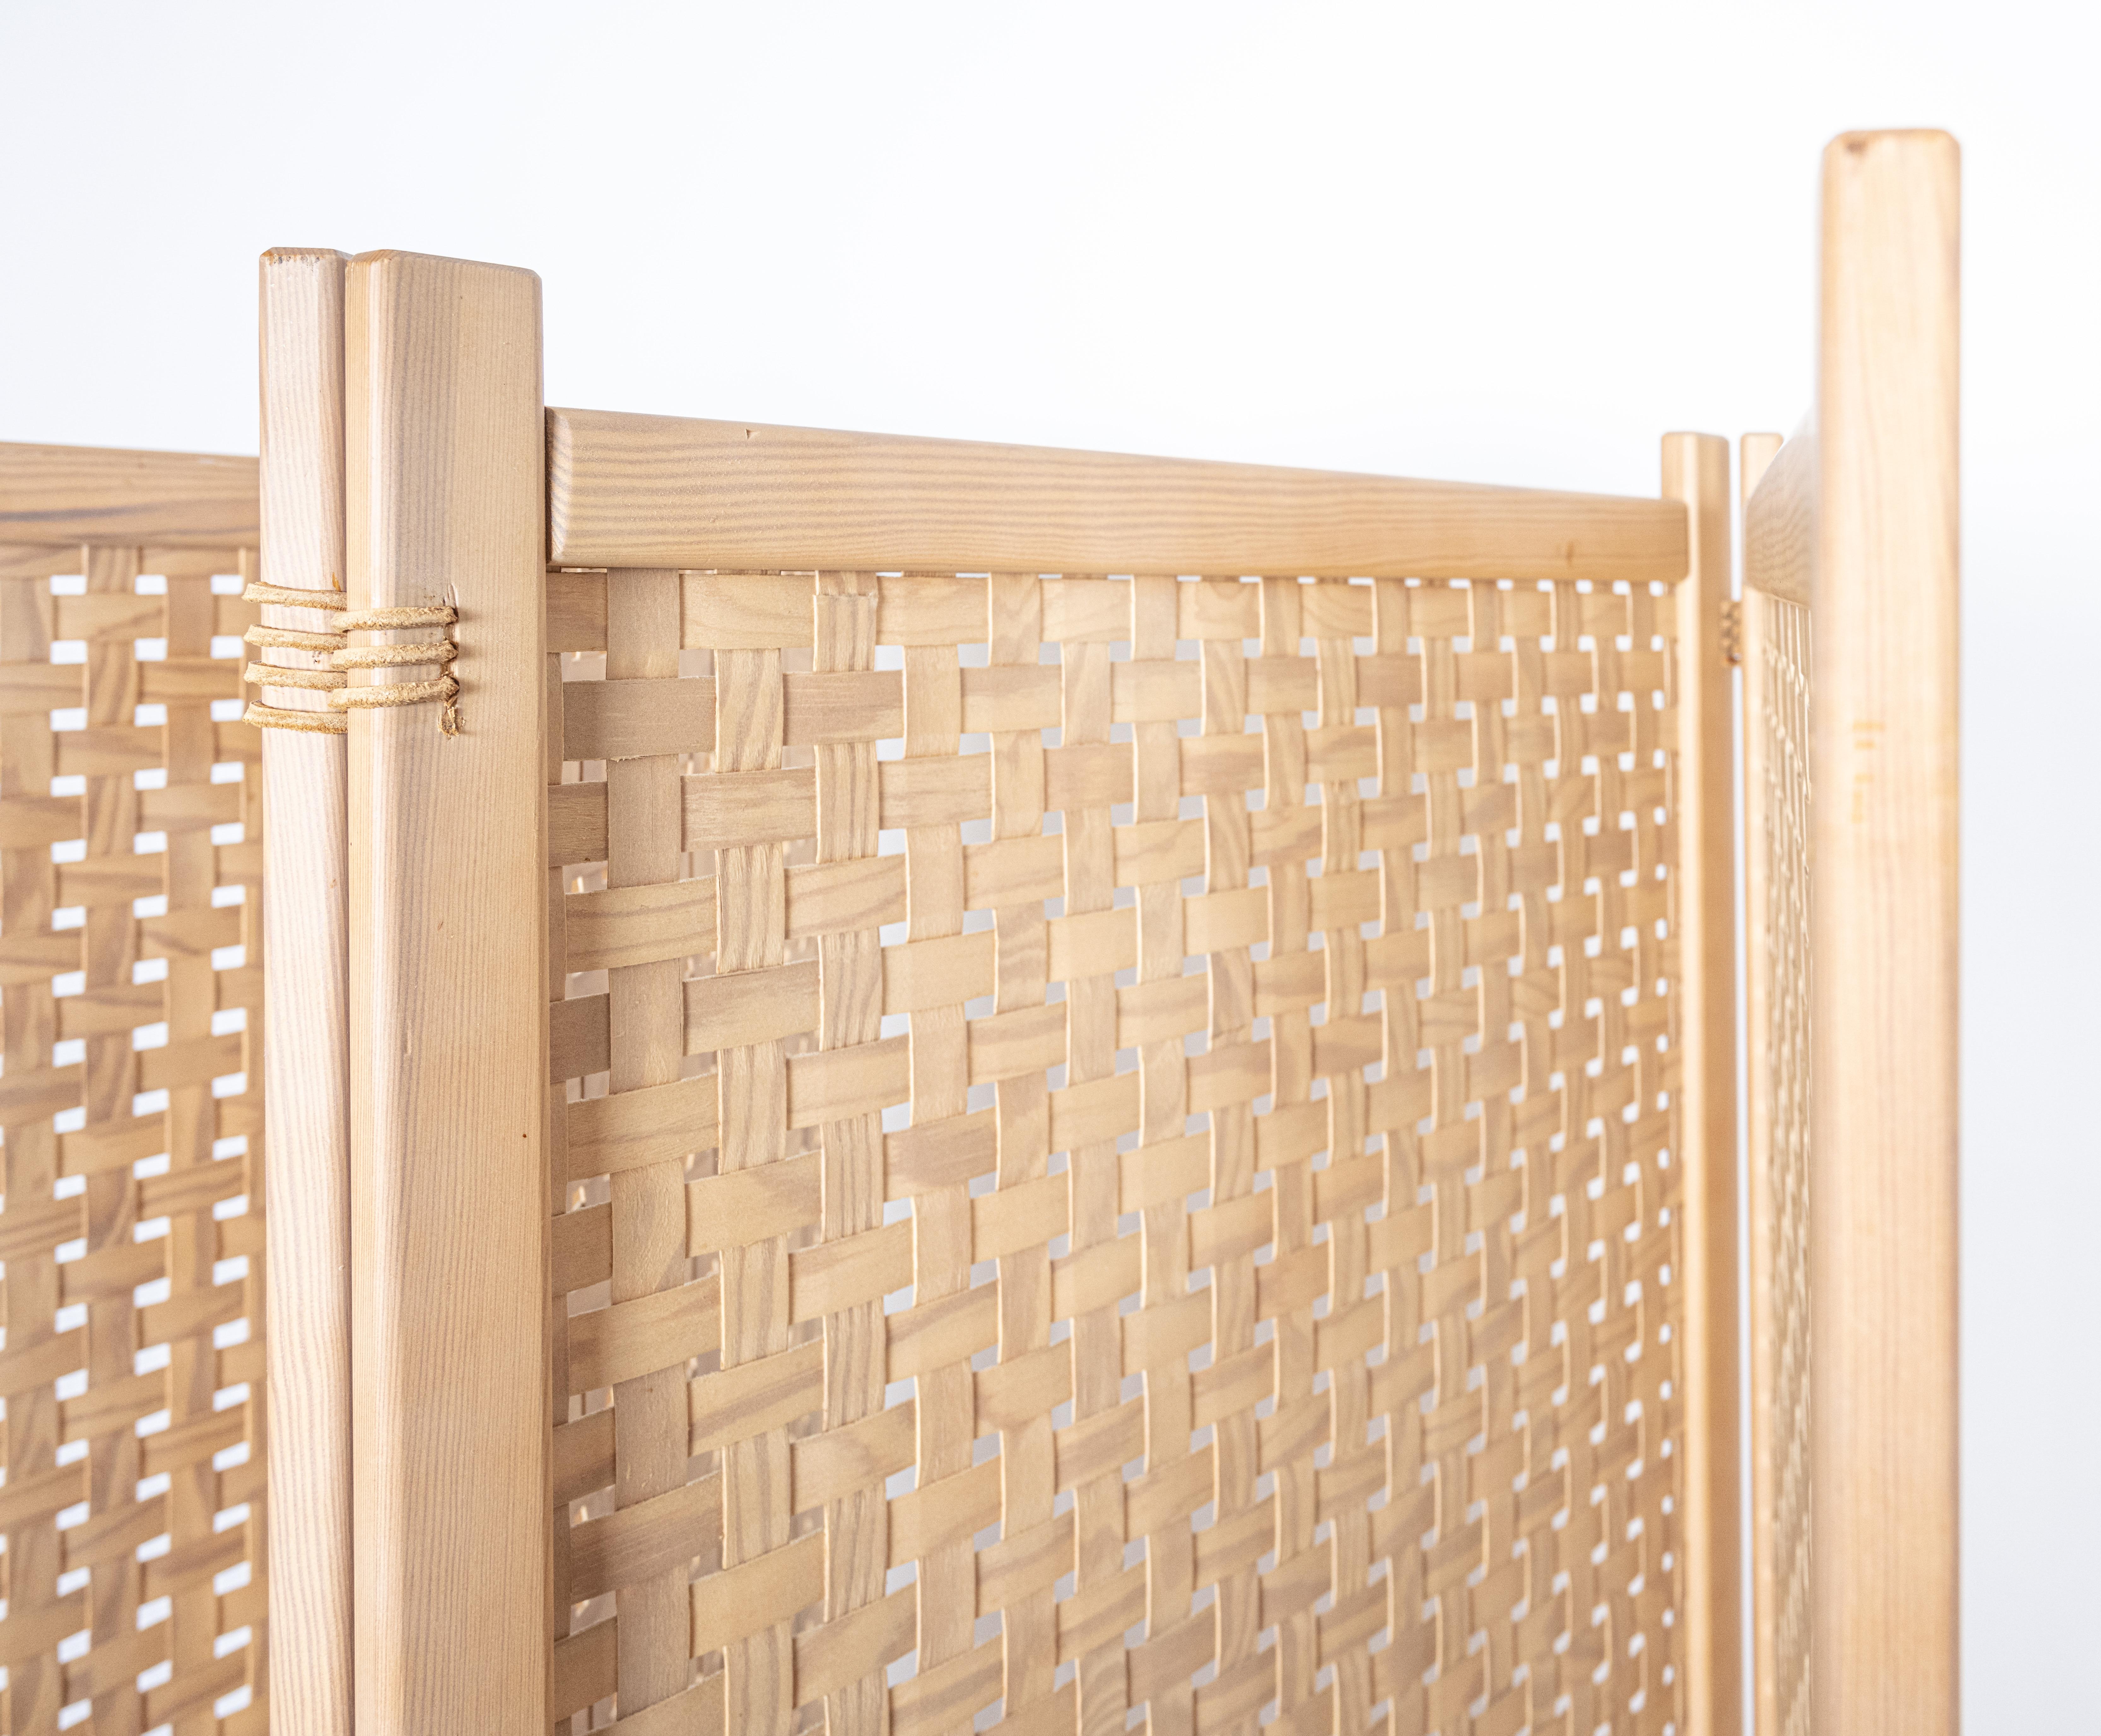 Rustic in material, refined in craftsmanship, a 4 panel room divider screen from Alberts in Tibro SE. An airy weave from strips of beech make up the panels and split hide straps bind the panels to each other. Each panel measures 23-1/2in x 62-1/4in.